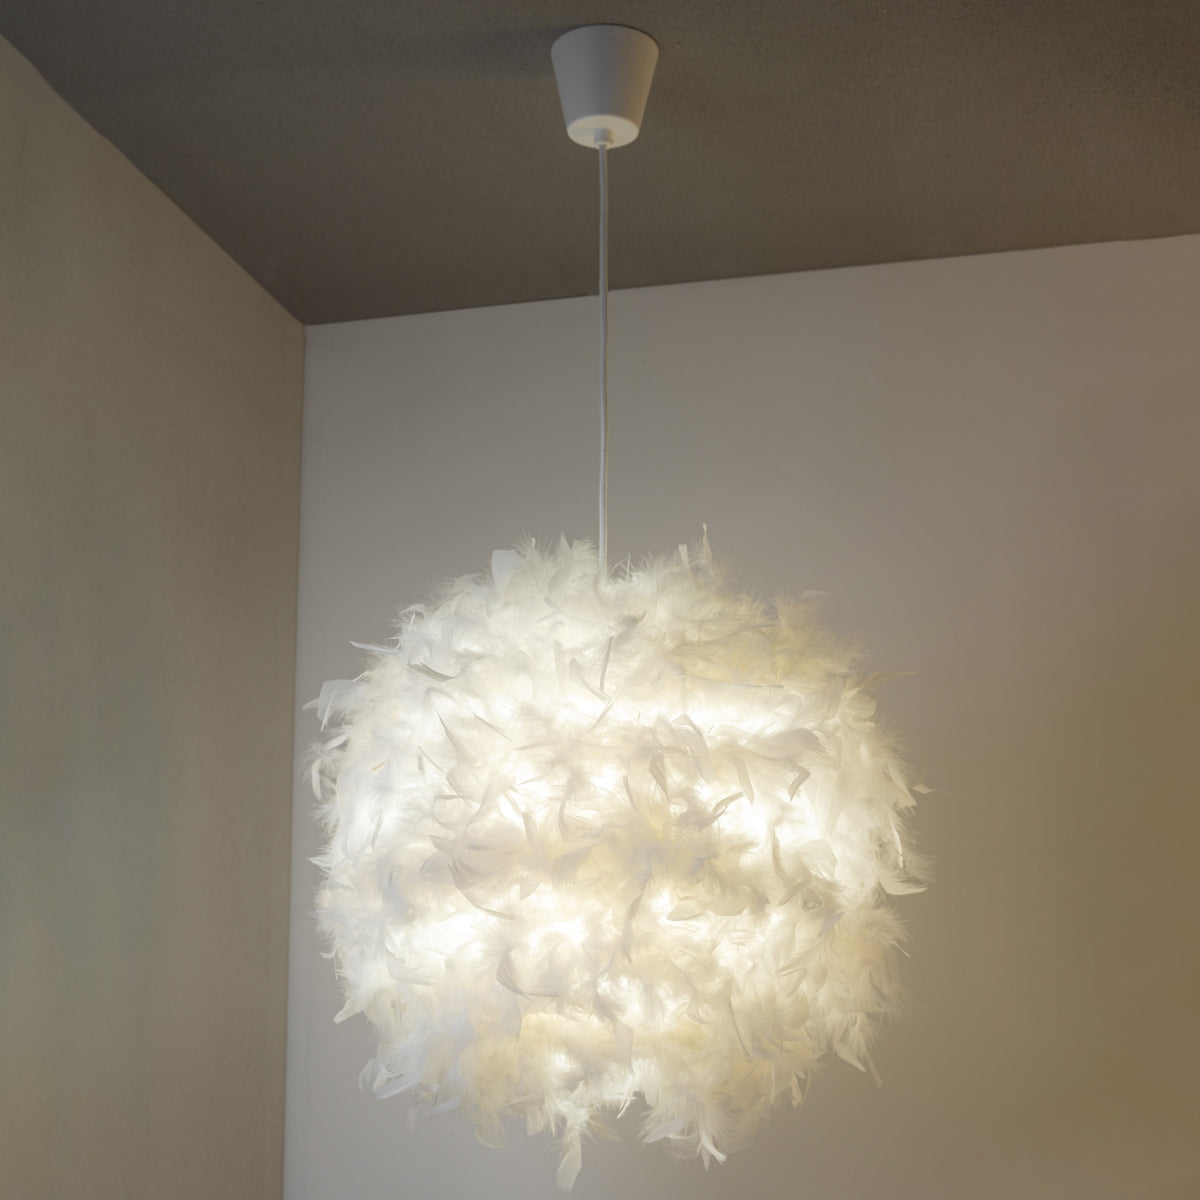 Our Rio easy fit white feather lamp shade is constructed from delicate feathers in a large round shape. This beautiful shade is perfect for adding a touch of fun and elegance to your room. Can be used as either a table lamp shade or a ceiling shade.